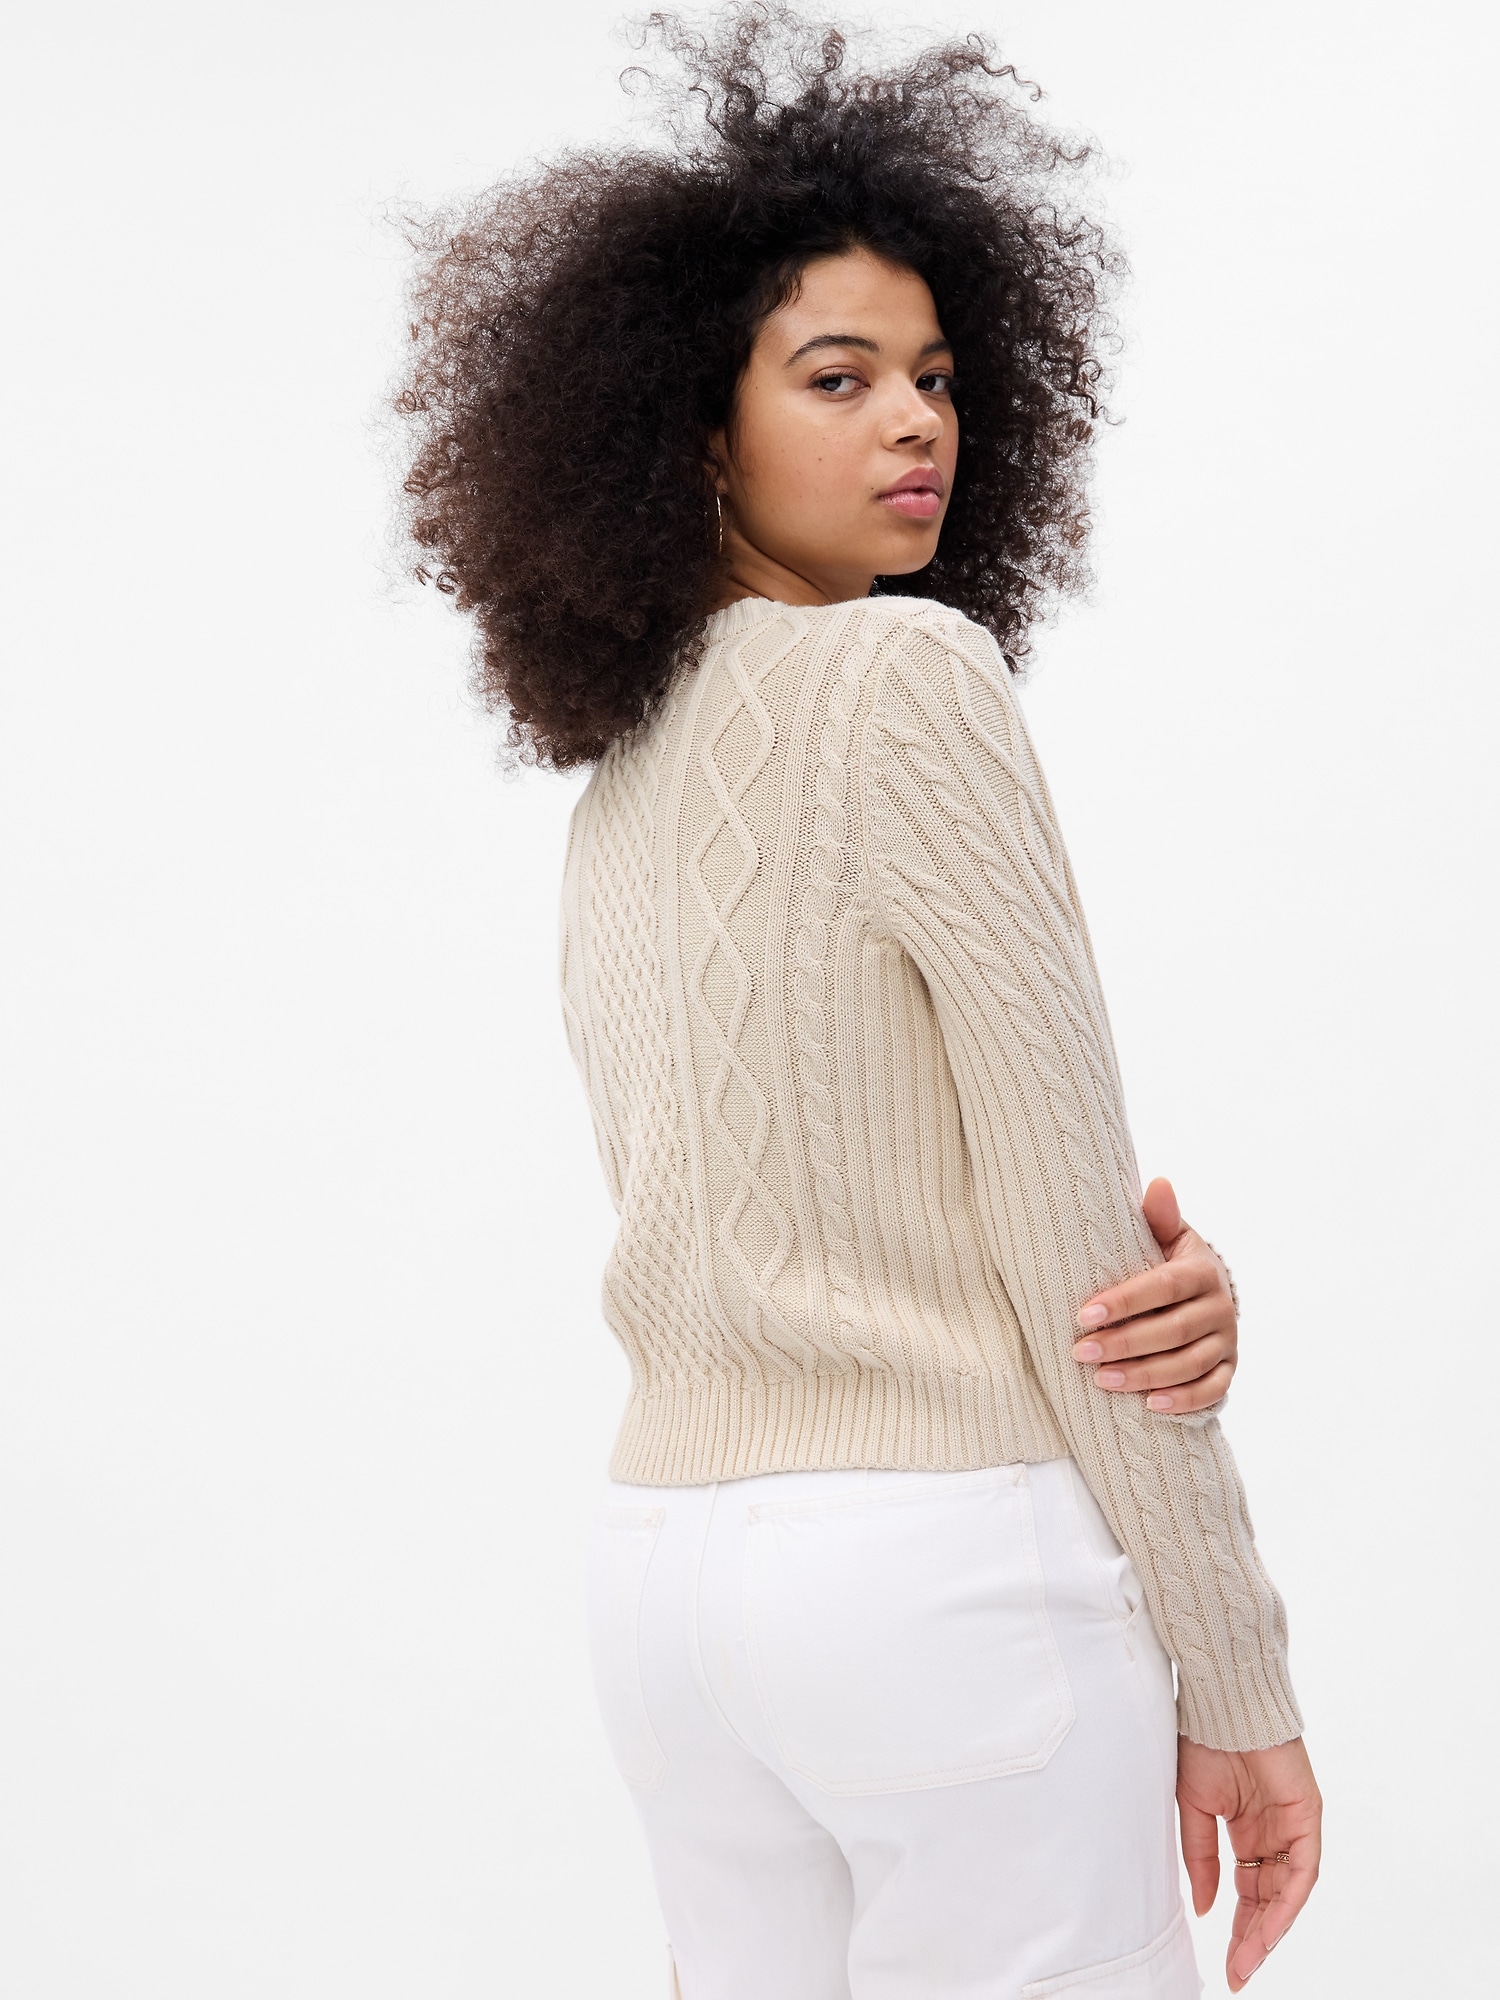 PROJECT GAP Cropped Cable-Knit Sweater | Gap